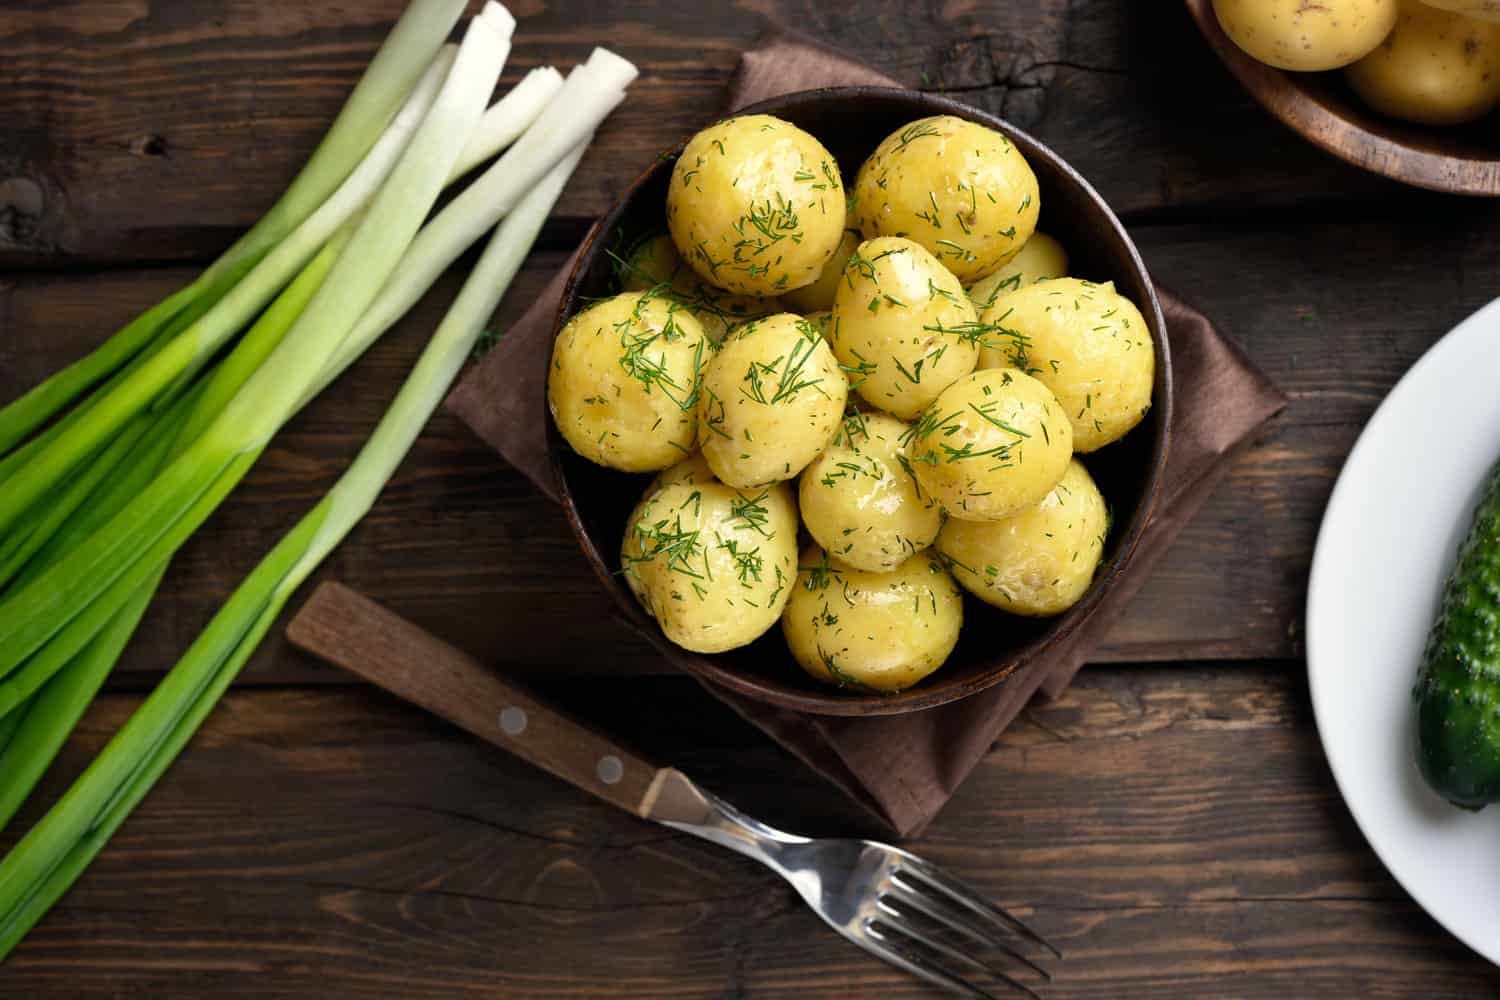 Boiled potatoes sprinkled with dill on top